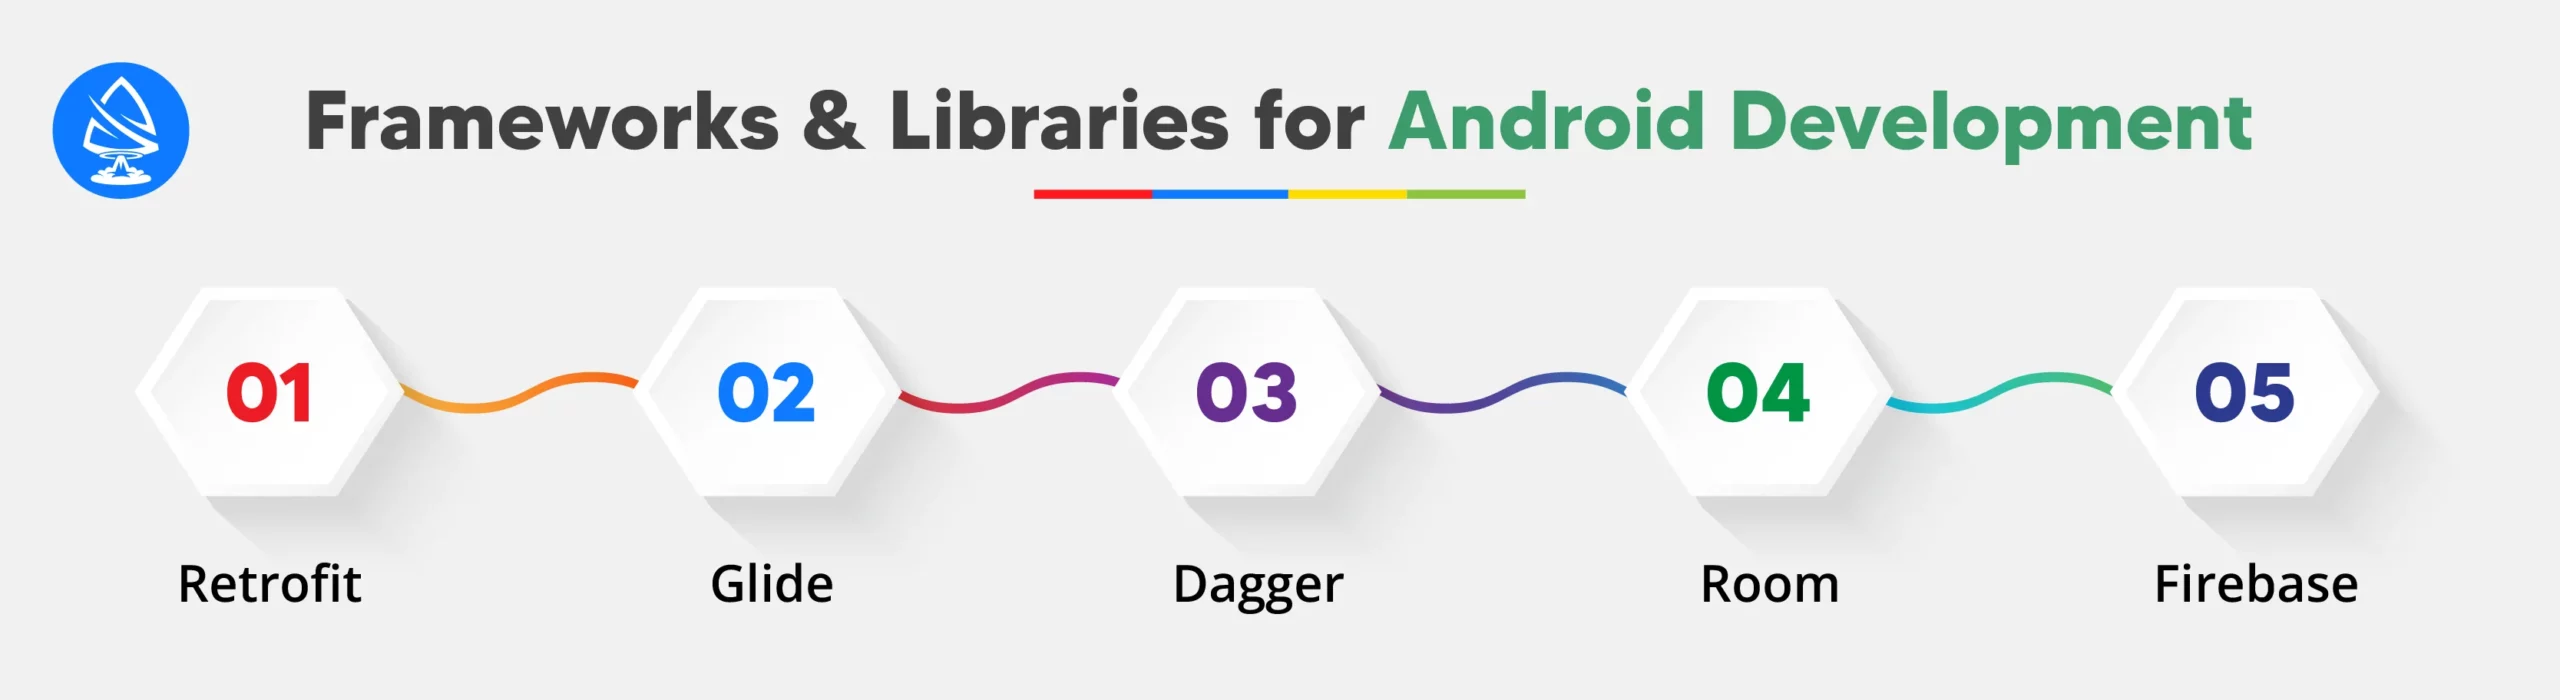 Frameworks and Libraries for Android Development